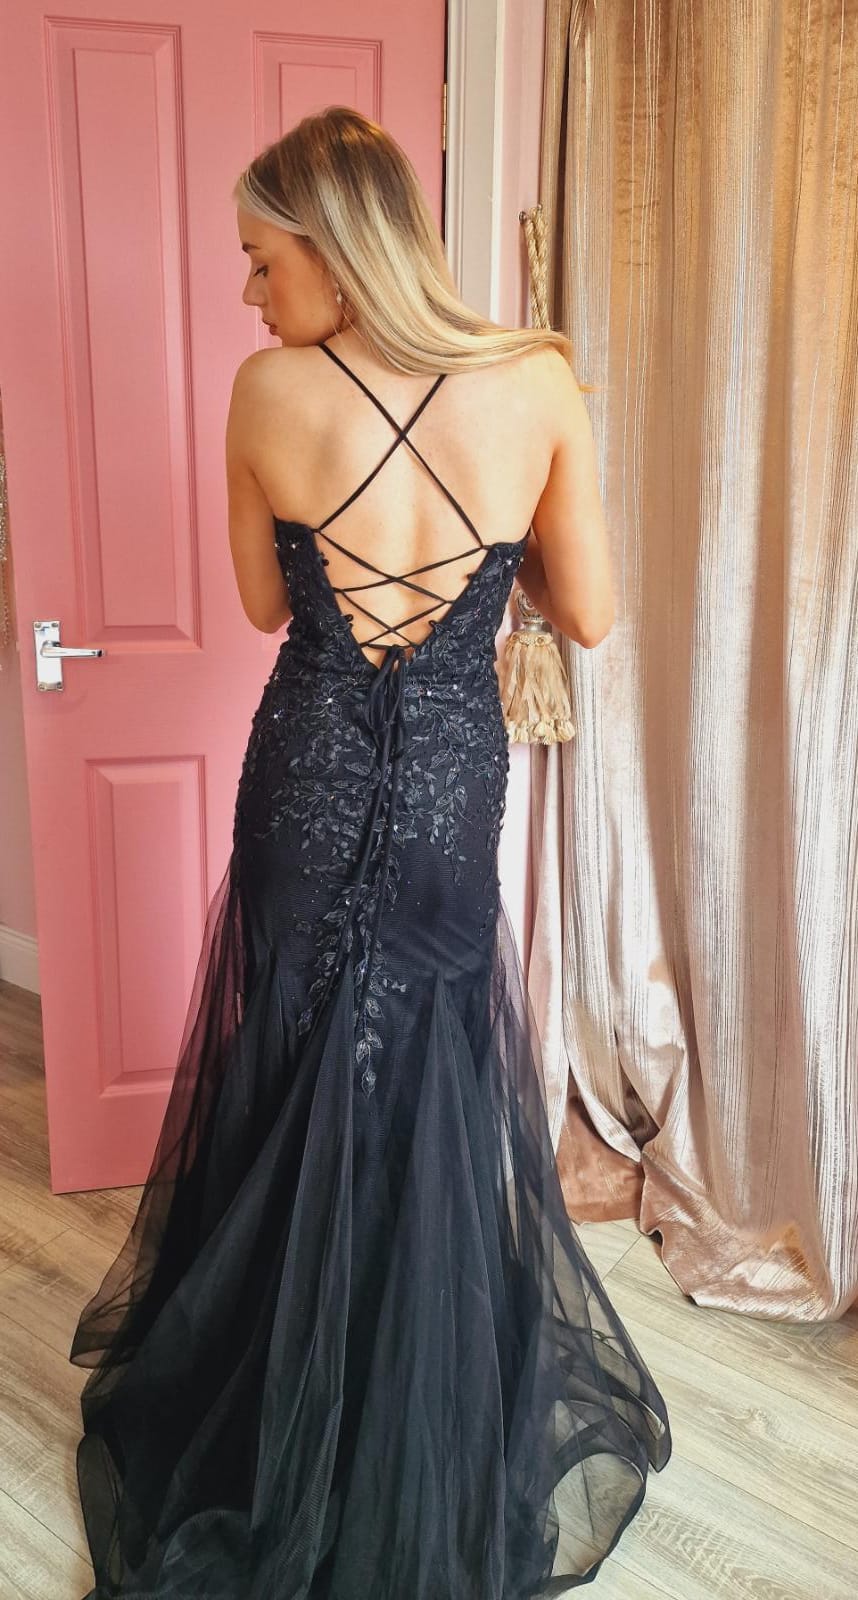 Natasha Black Embroidered Bodice With Laced Back Formal Prom Dress